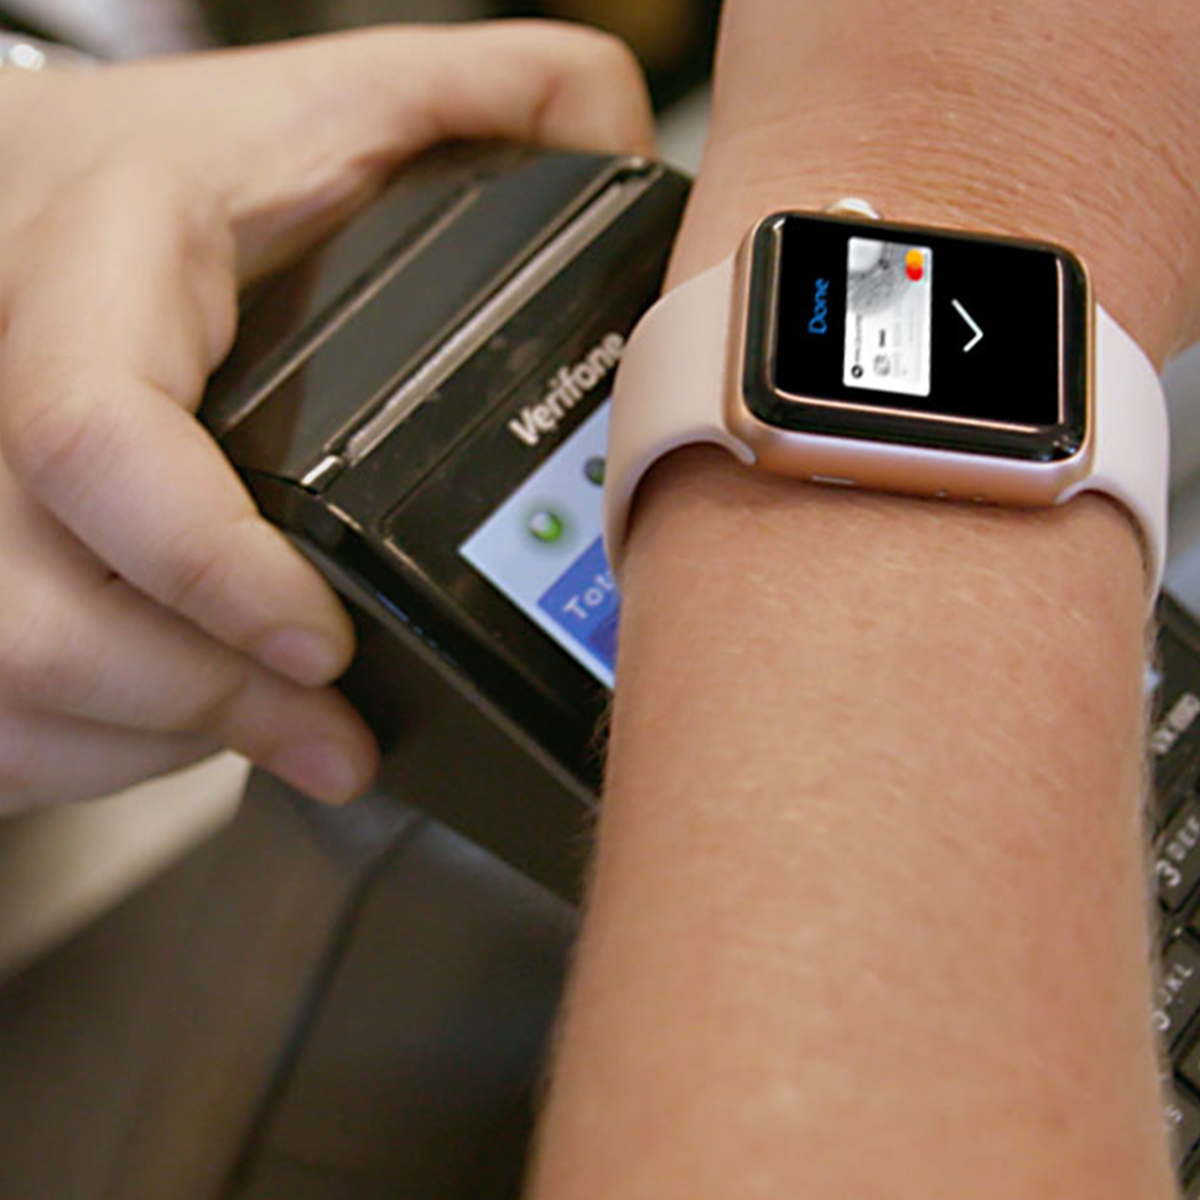 Biancha with Apple Watch at payment terminal